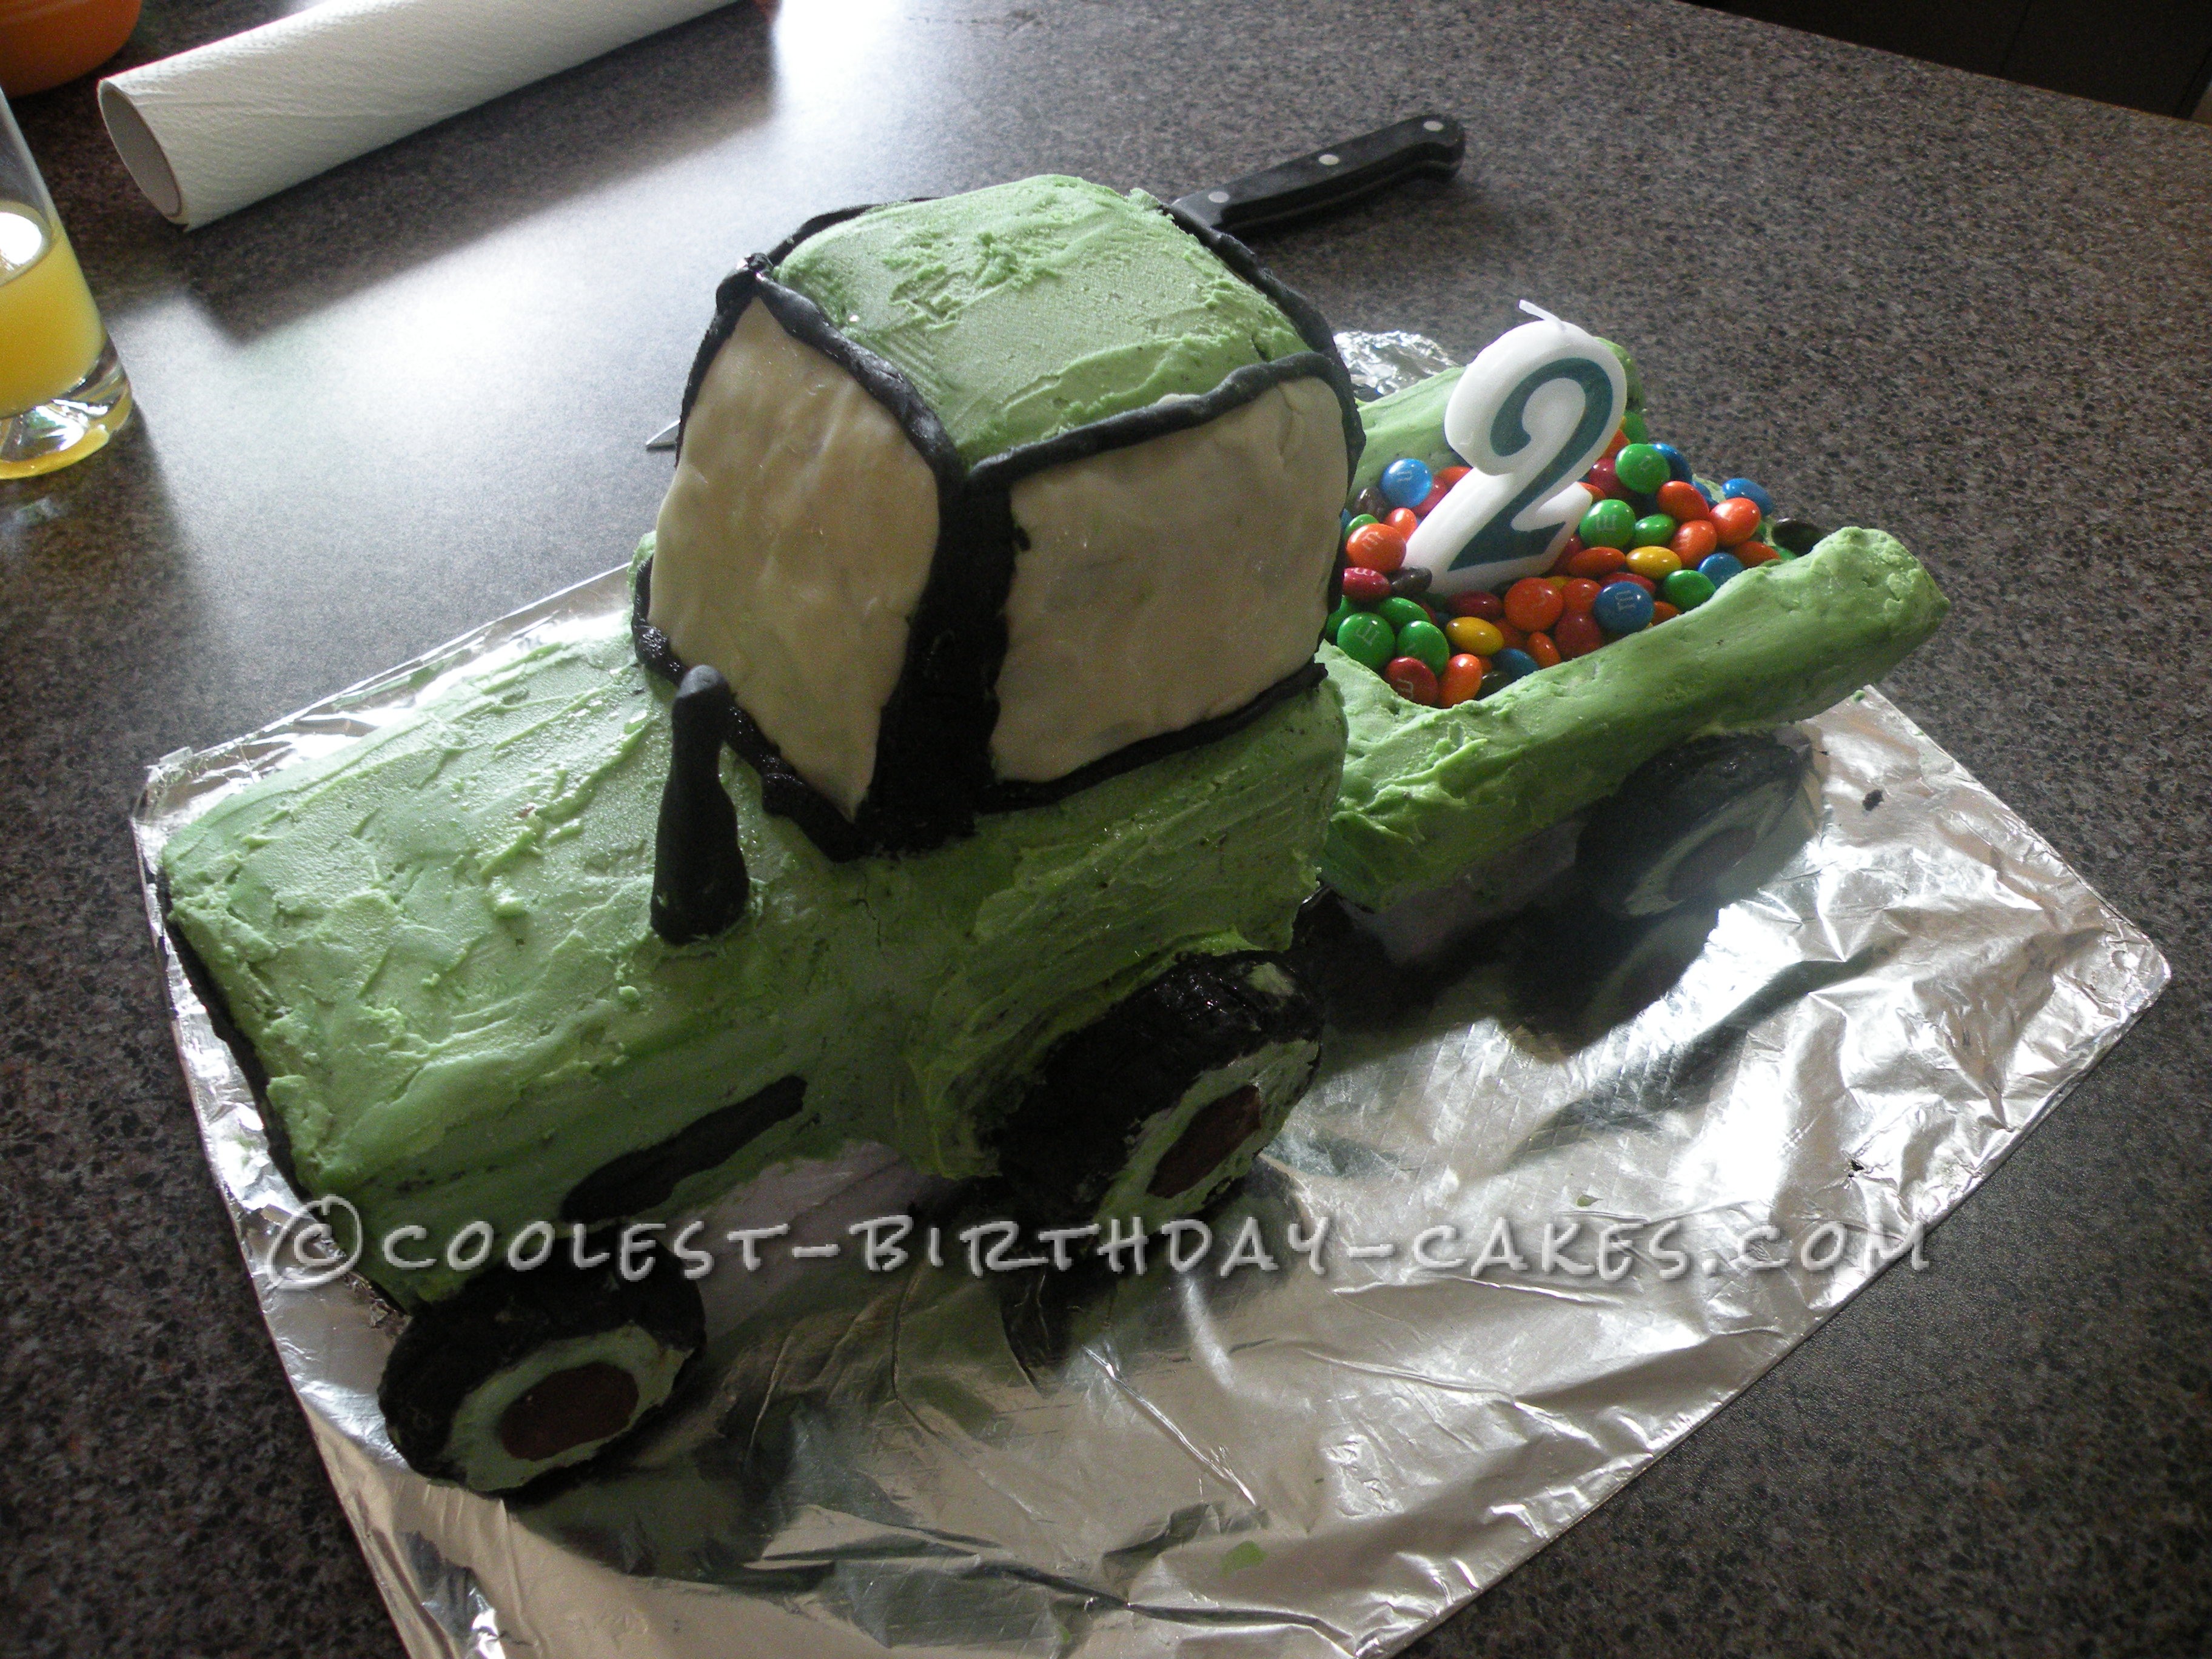 Cool Homemade Tractor Cake